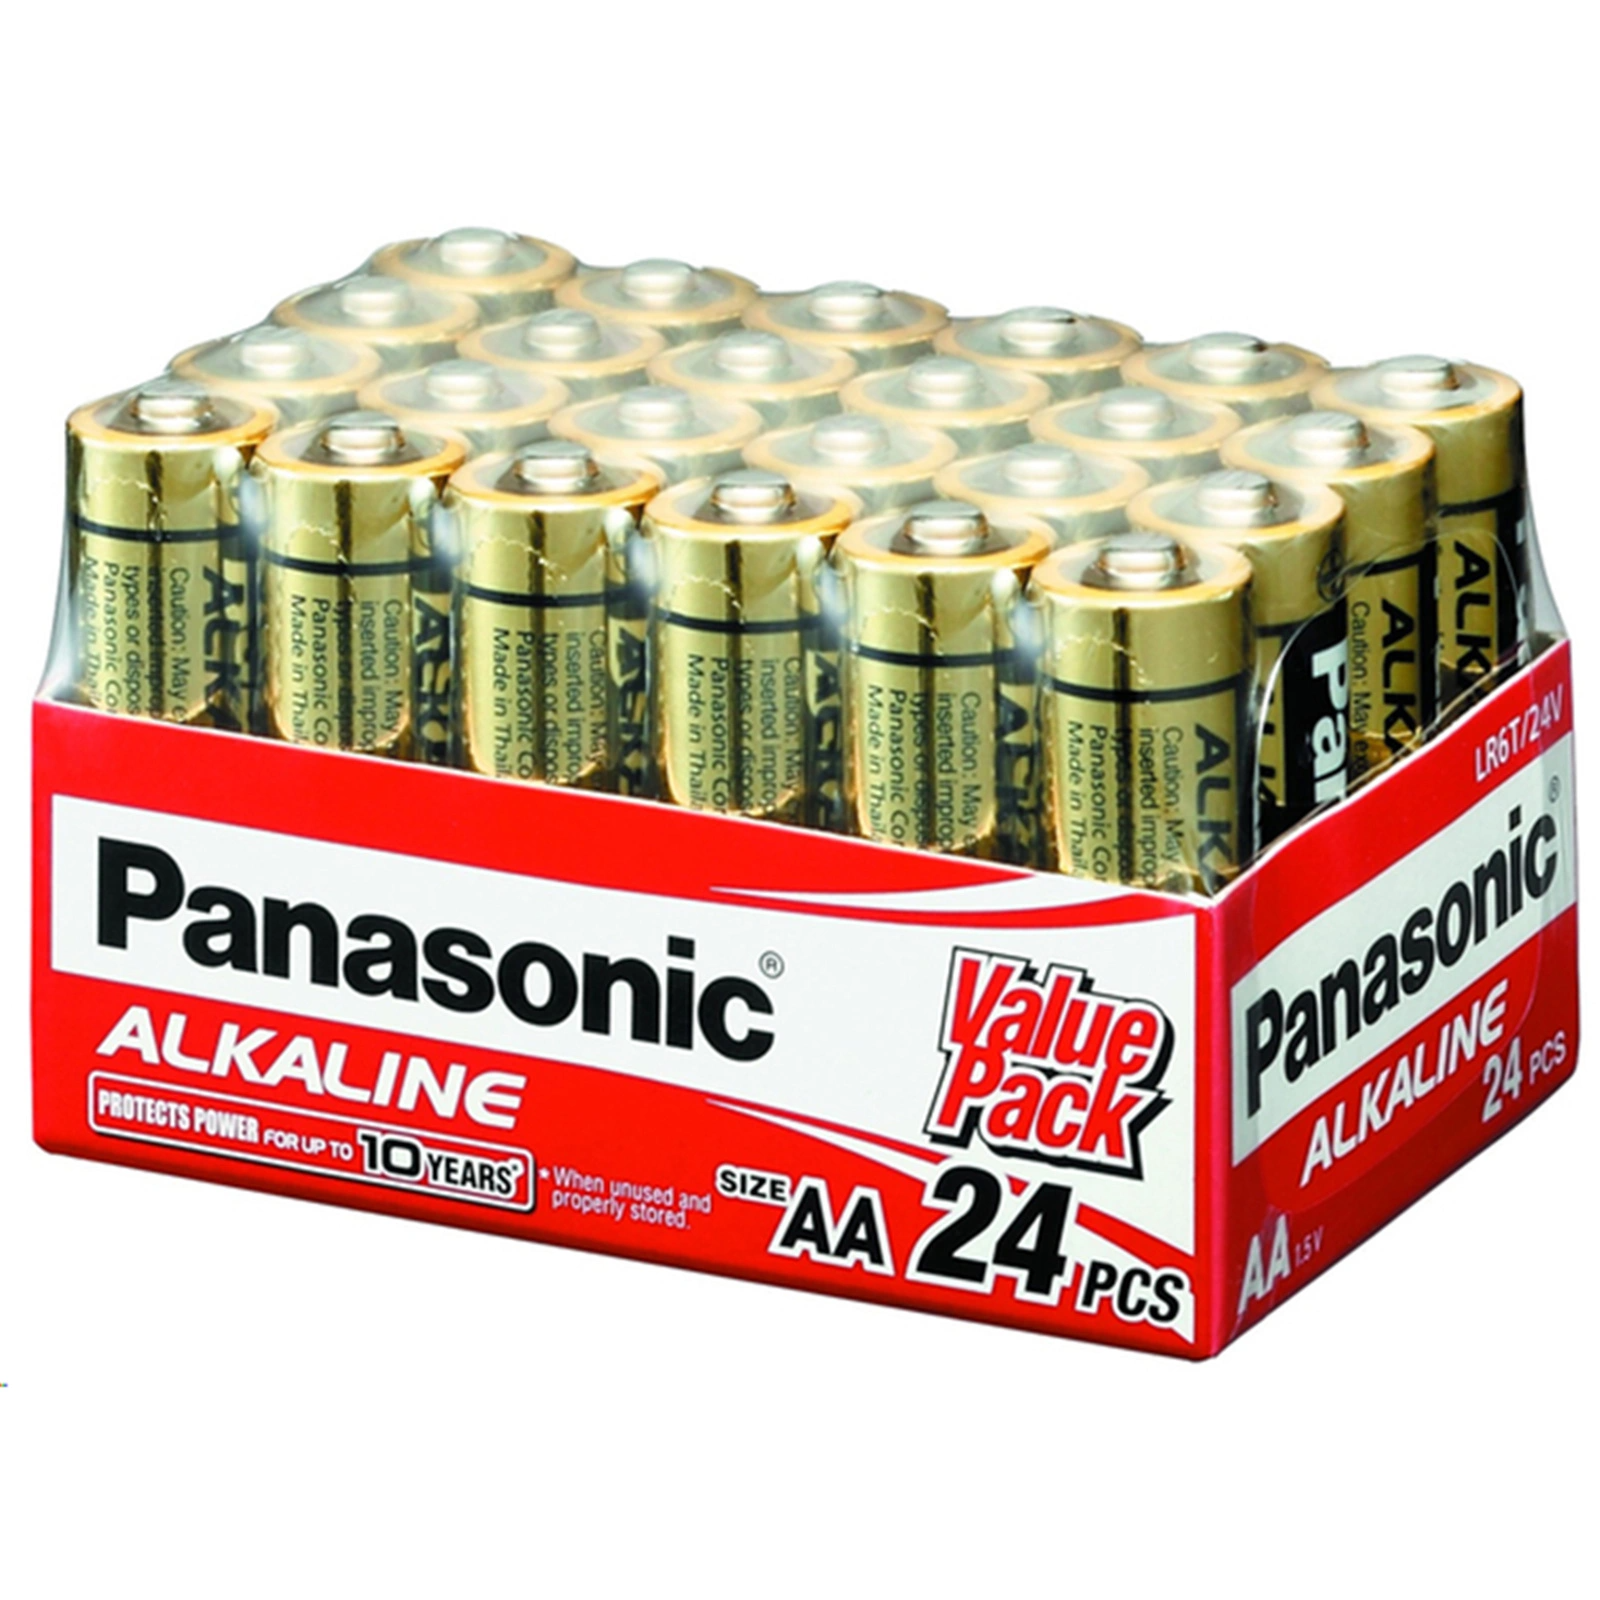 Picture of Panasonic AA Alkaline Battery 24 Pack